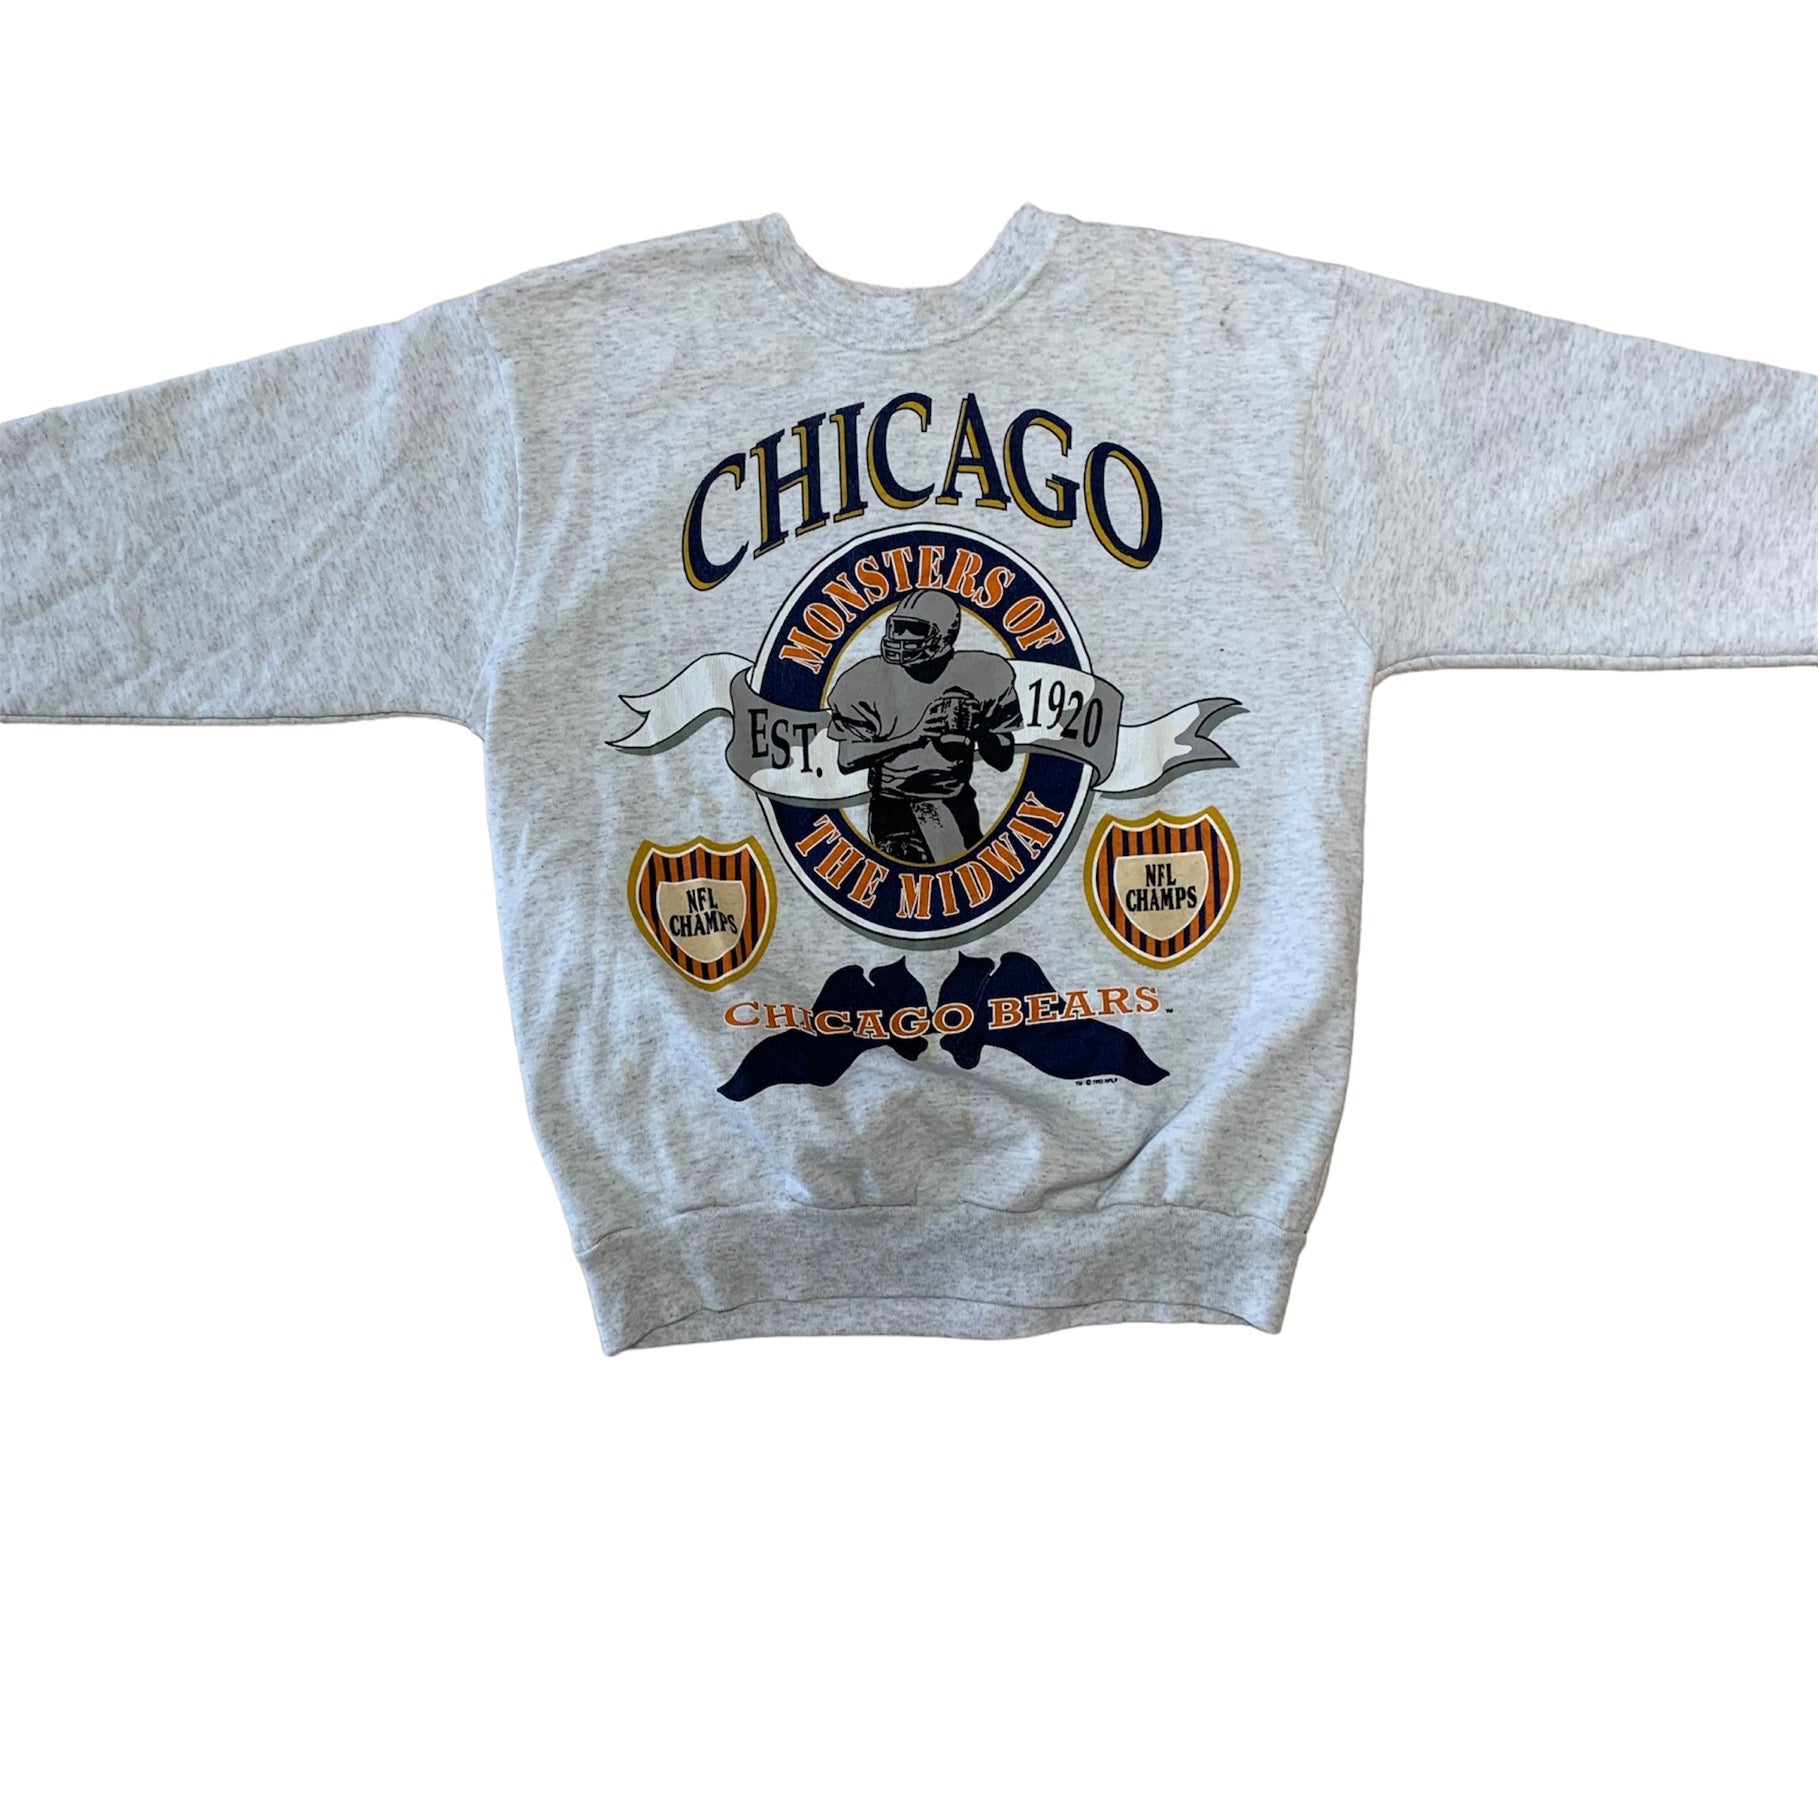 1993 CHICAGO BEARS DOUBLE SIDED CREWNECK